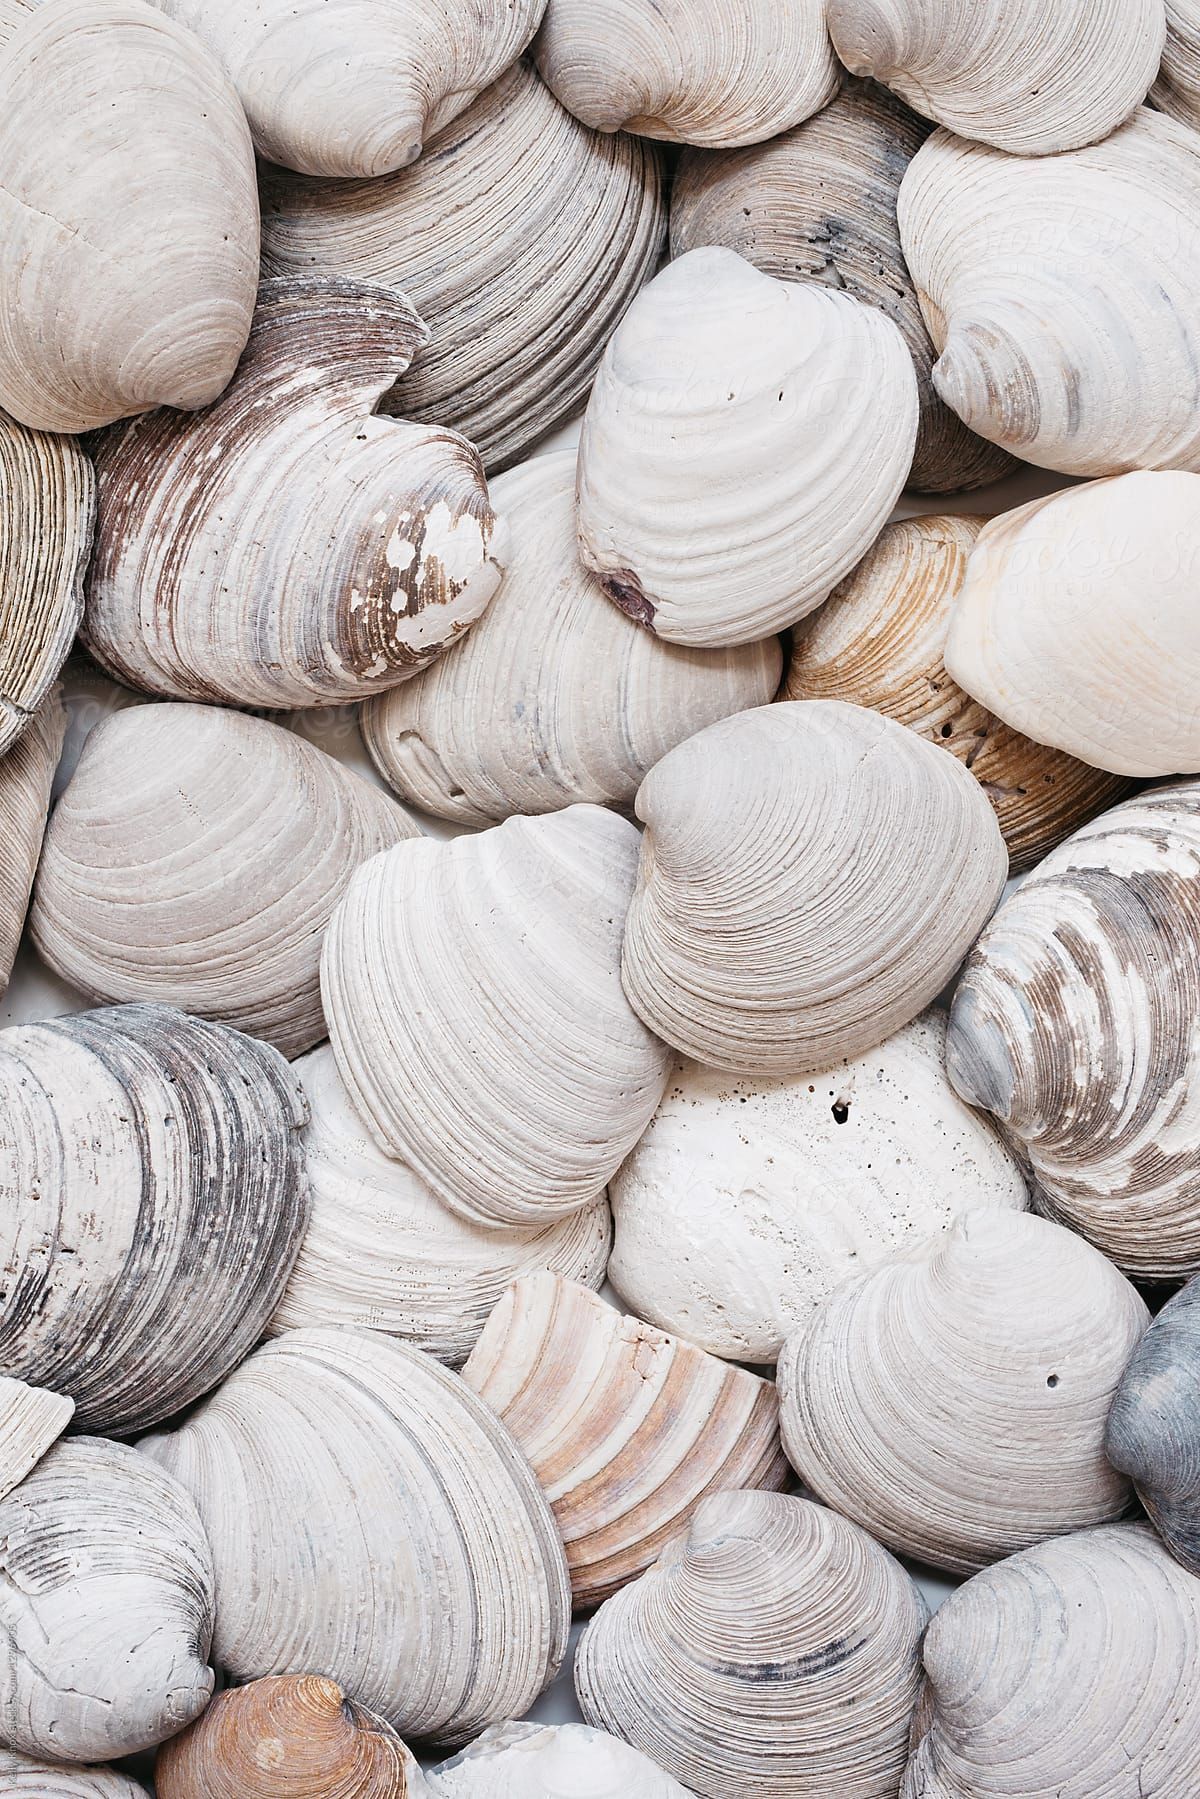 Overhead Image Of Rustic Clam Shells Download This High Resolution By Kelly Knox From Stocksy United. Shells, Photo Wall Collage, Beach Aesthetic